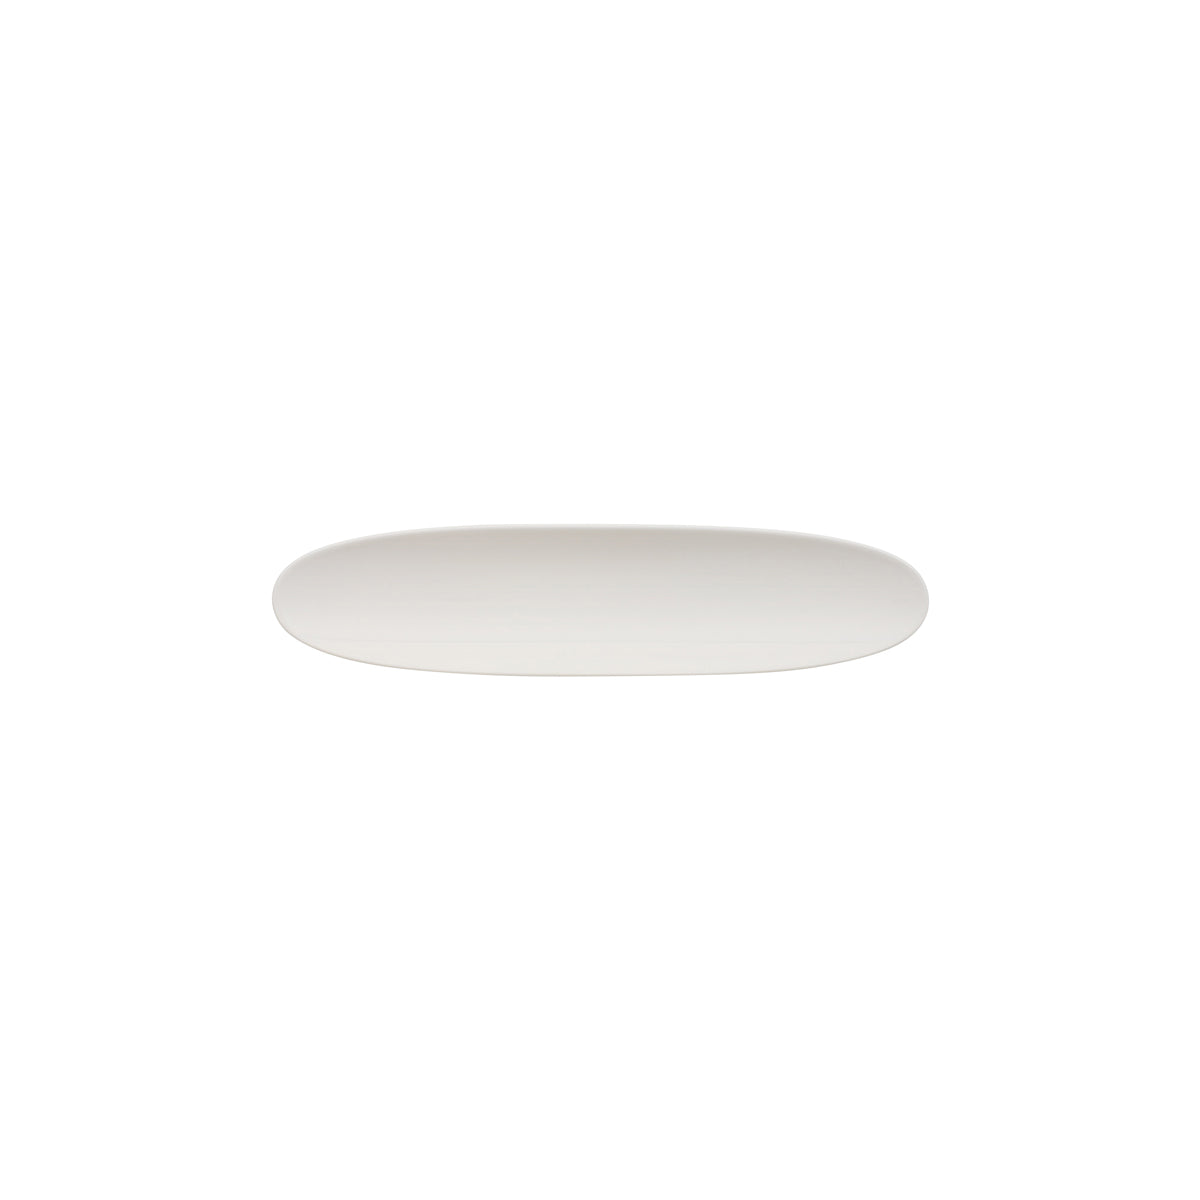 VB16-3275-3858 Villeroy And Boch Villeroy And Boch Marchesi White Gourmet Boat 325x75mm Tomkin Australia Hospitality Supplies